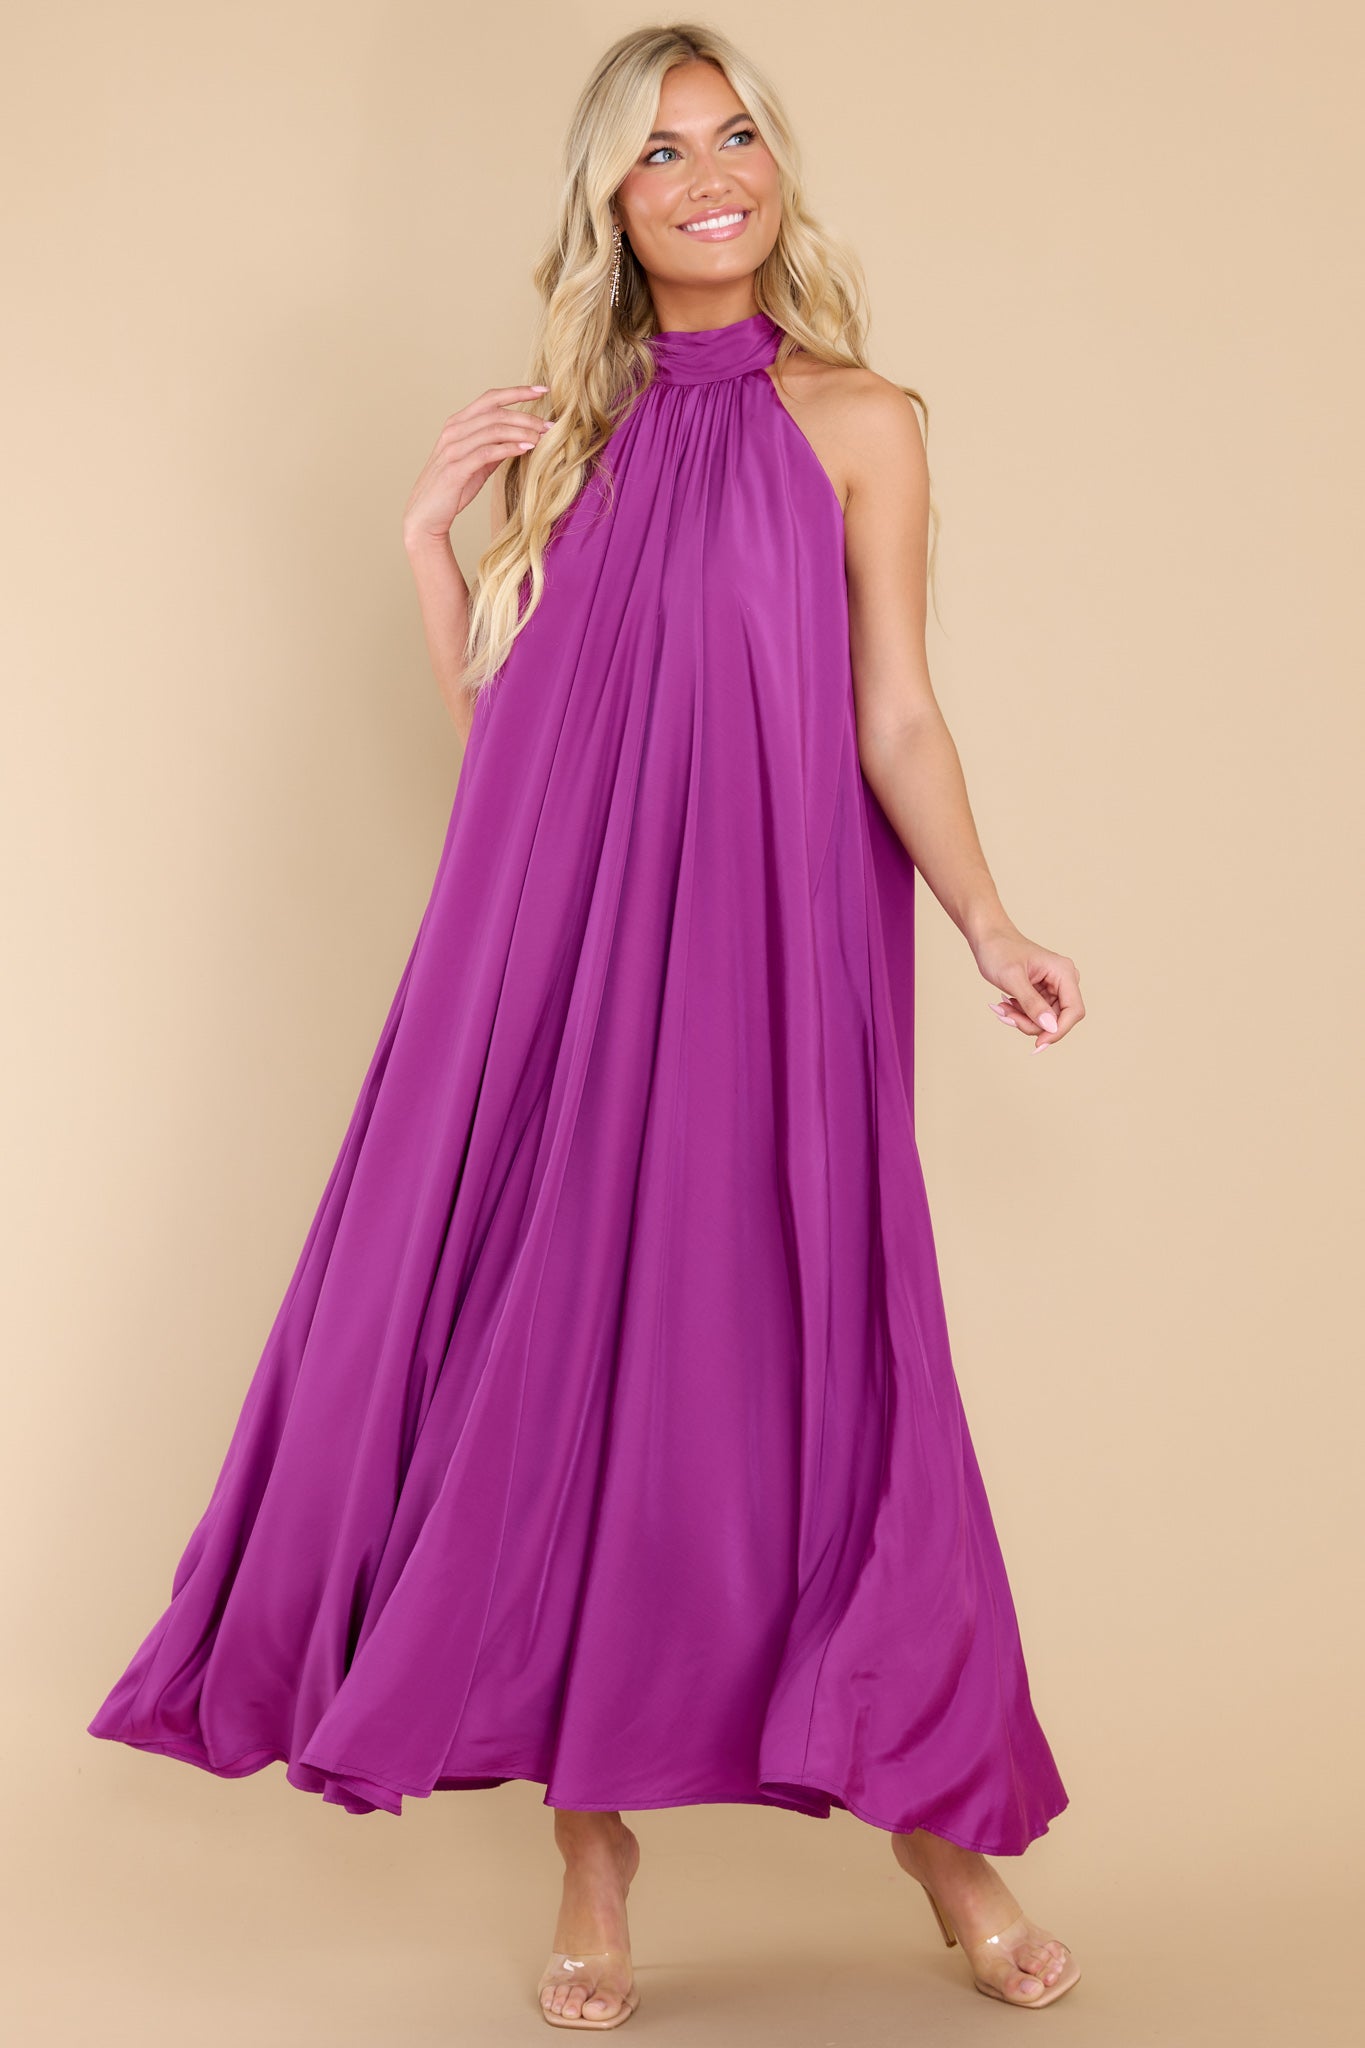 Lovely Bright Purple Tiered Maxi Dress - Colors Of Fall | Red Dress